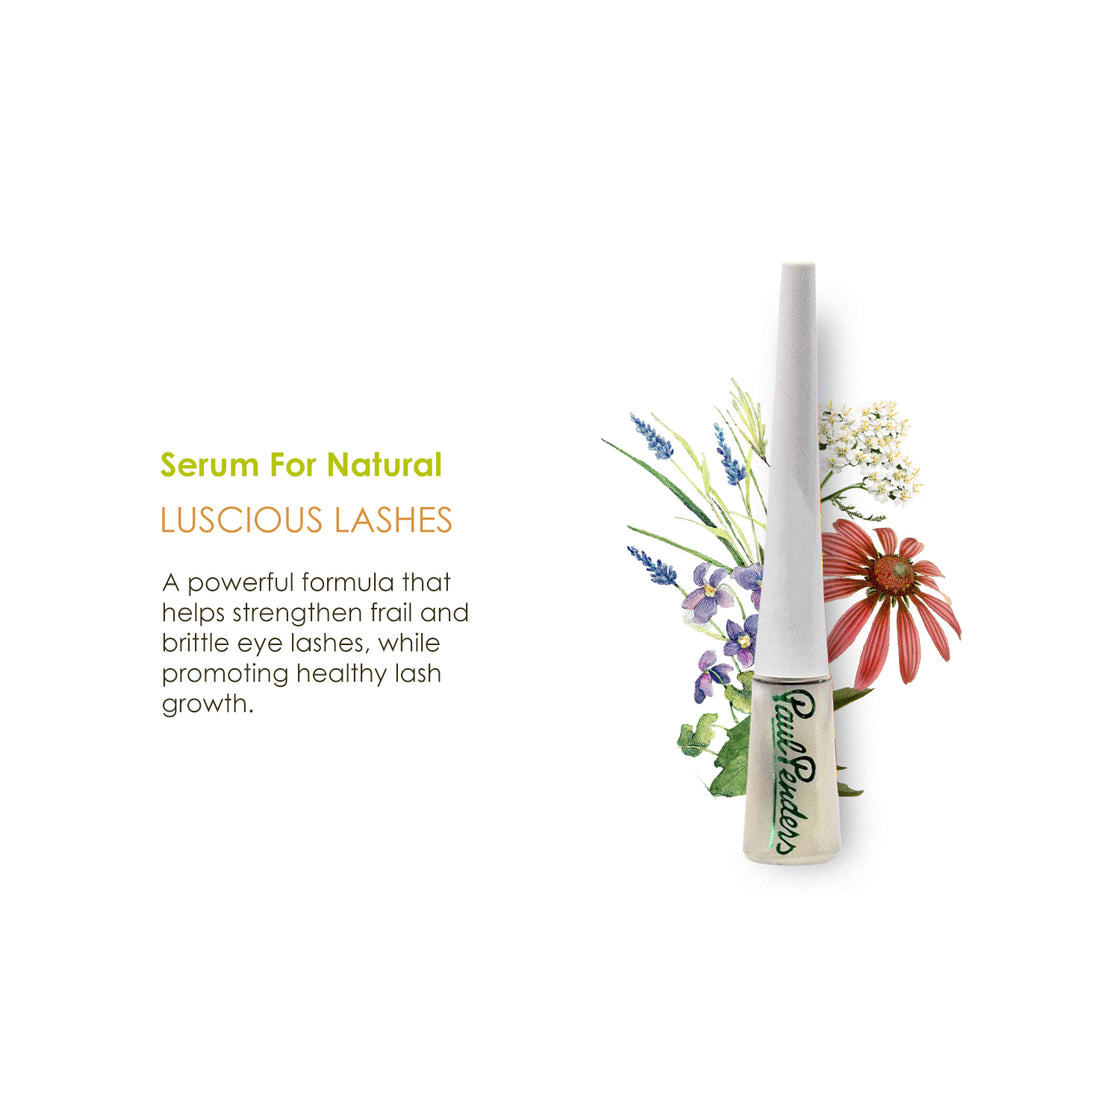 Paul Penders Growth Serum For Natural Luscious Lashes | Formula For Longer & Thicker Lashes 5ml